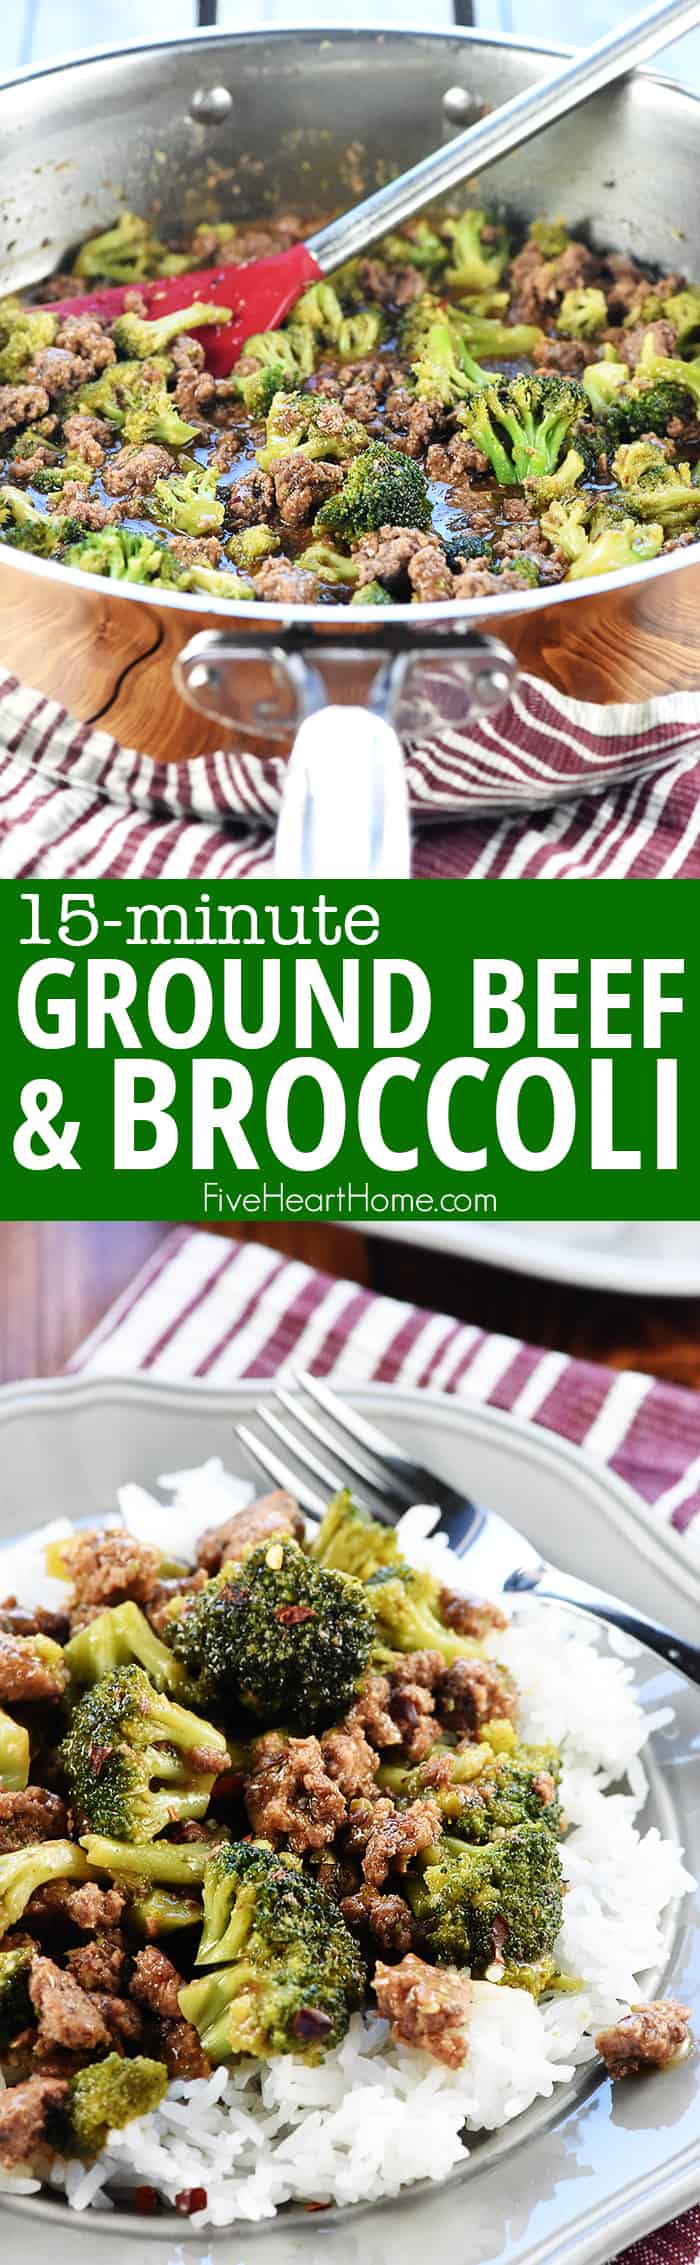 Healthy Ground Beef and Broccoli ~ one of the BEST ground beef recipes...a flavorful, quick and easy skillet recipe that comes together in 15 minutes in just one pan! | FiveHeartHome.com #groundbeefrecipes #beefandbroccoli via @fivehearthome